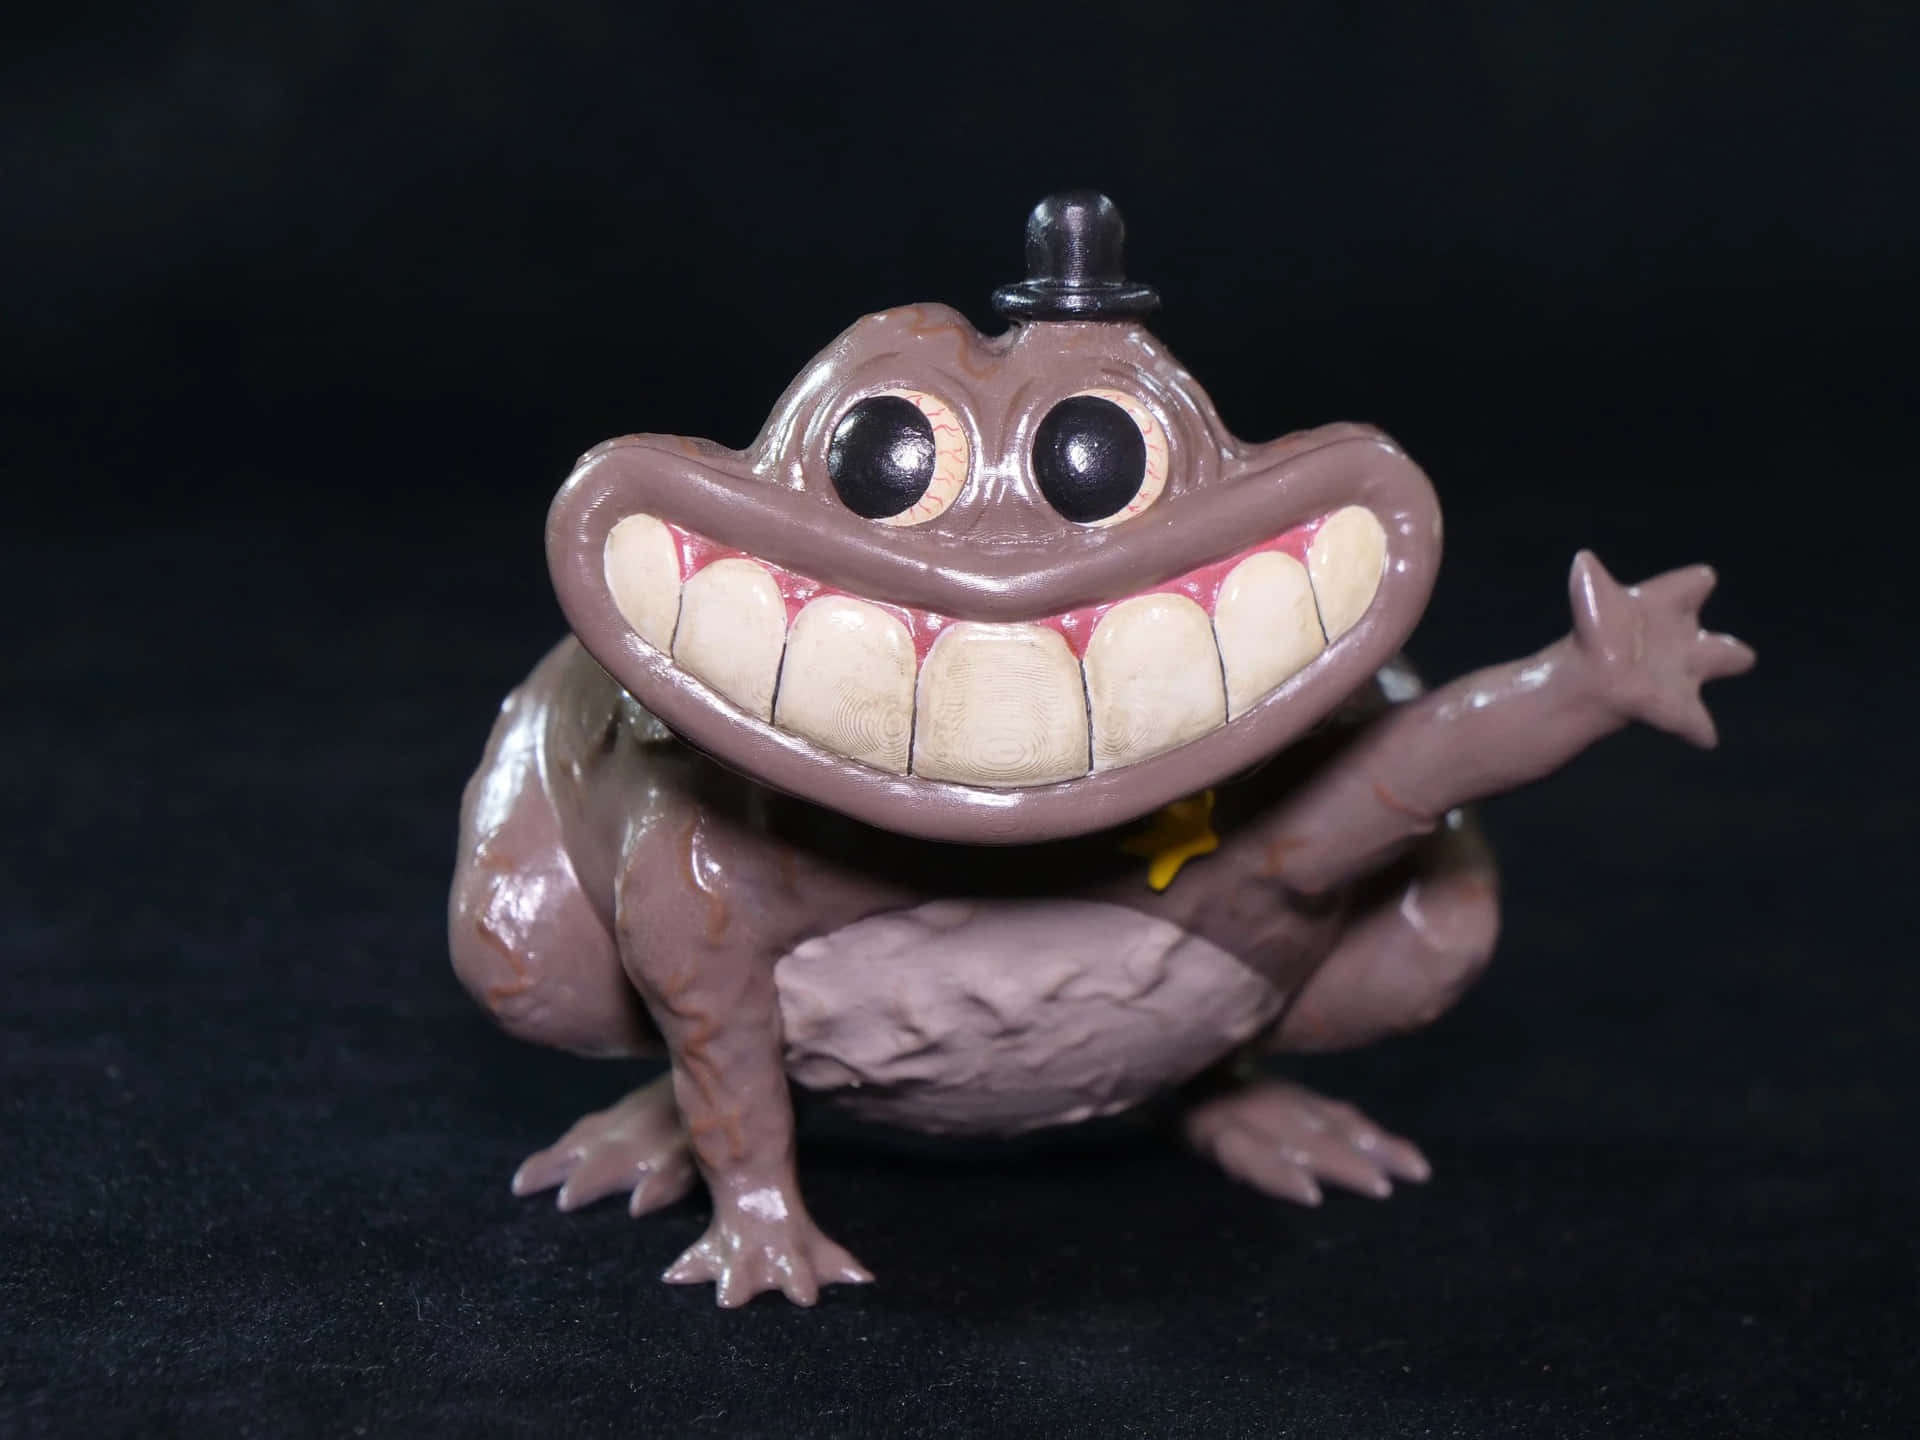 Smiling Frog Toy Figure Wallpaper